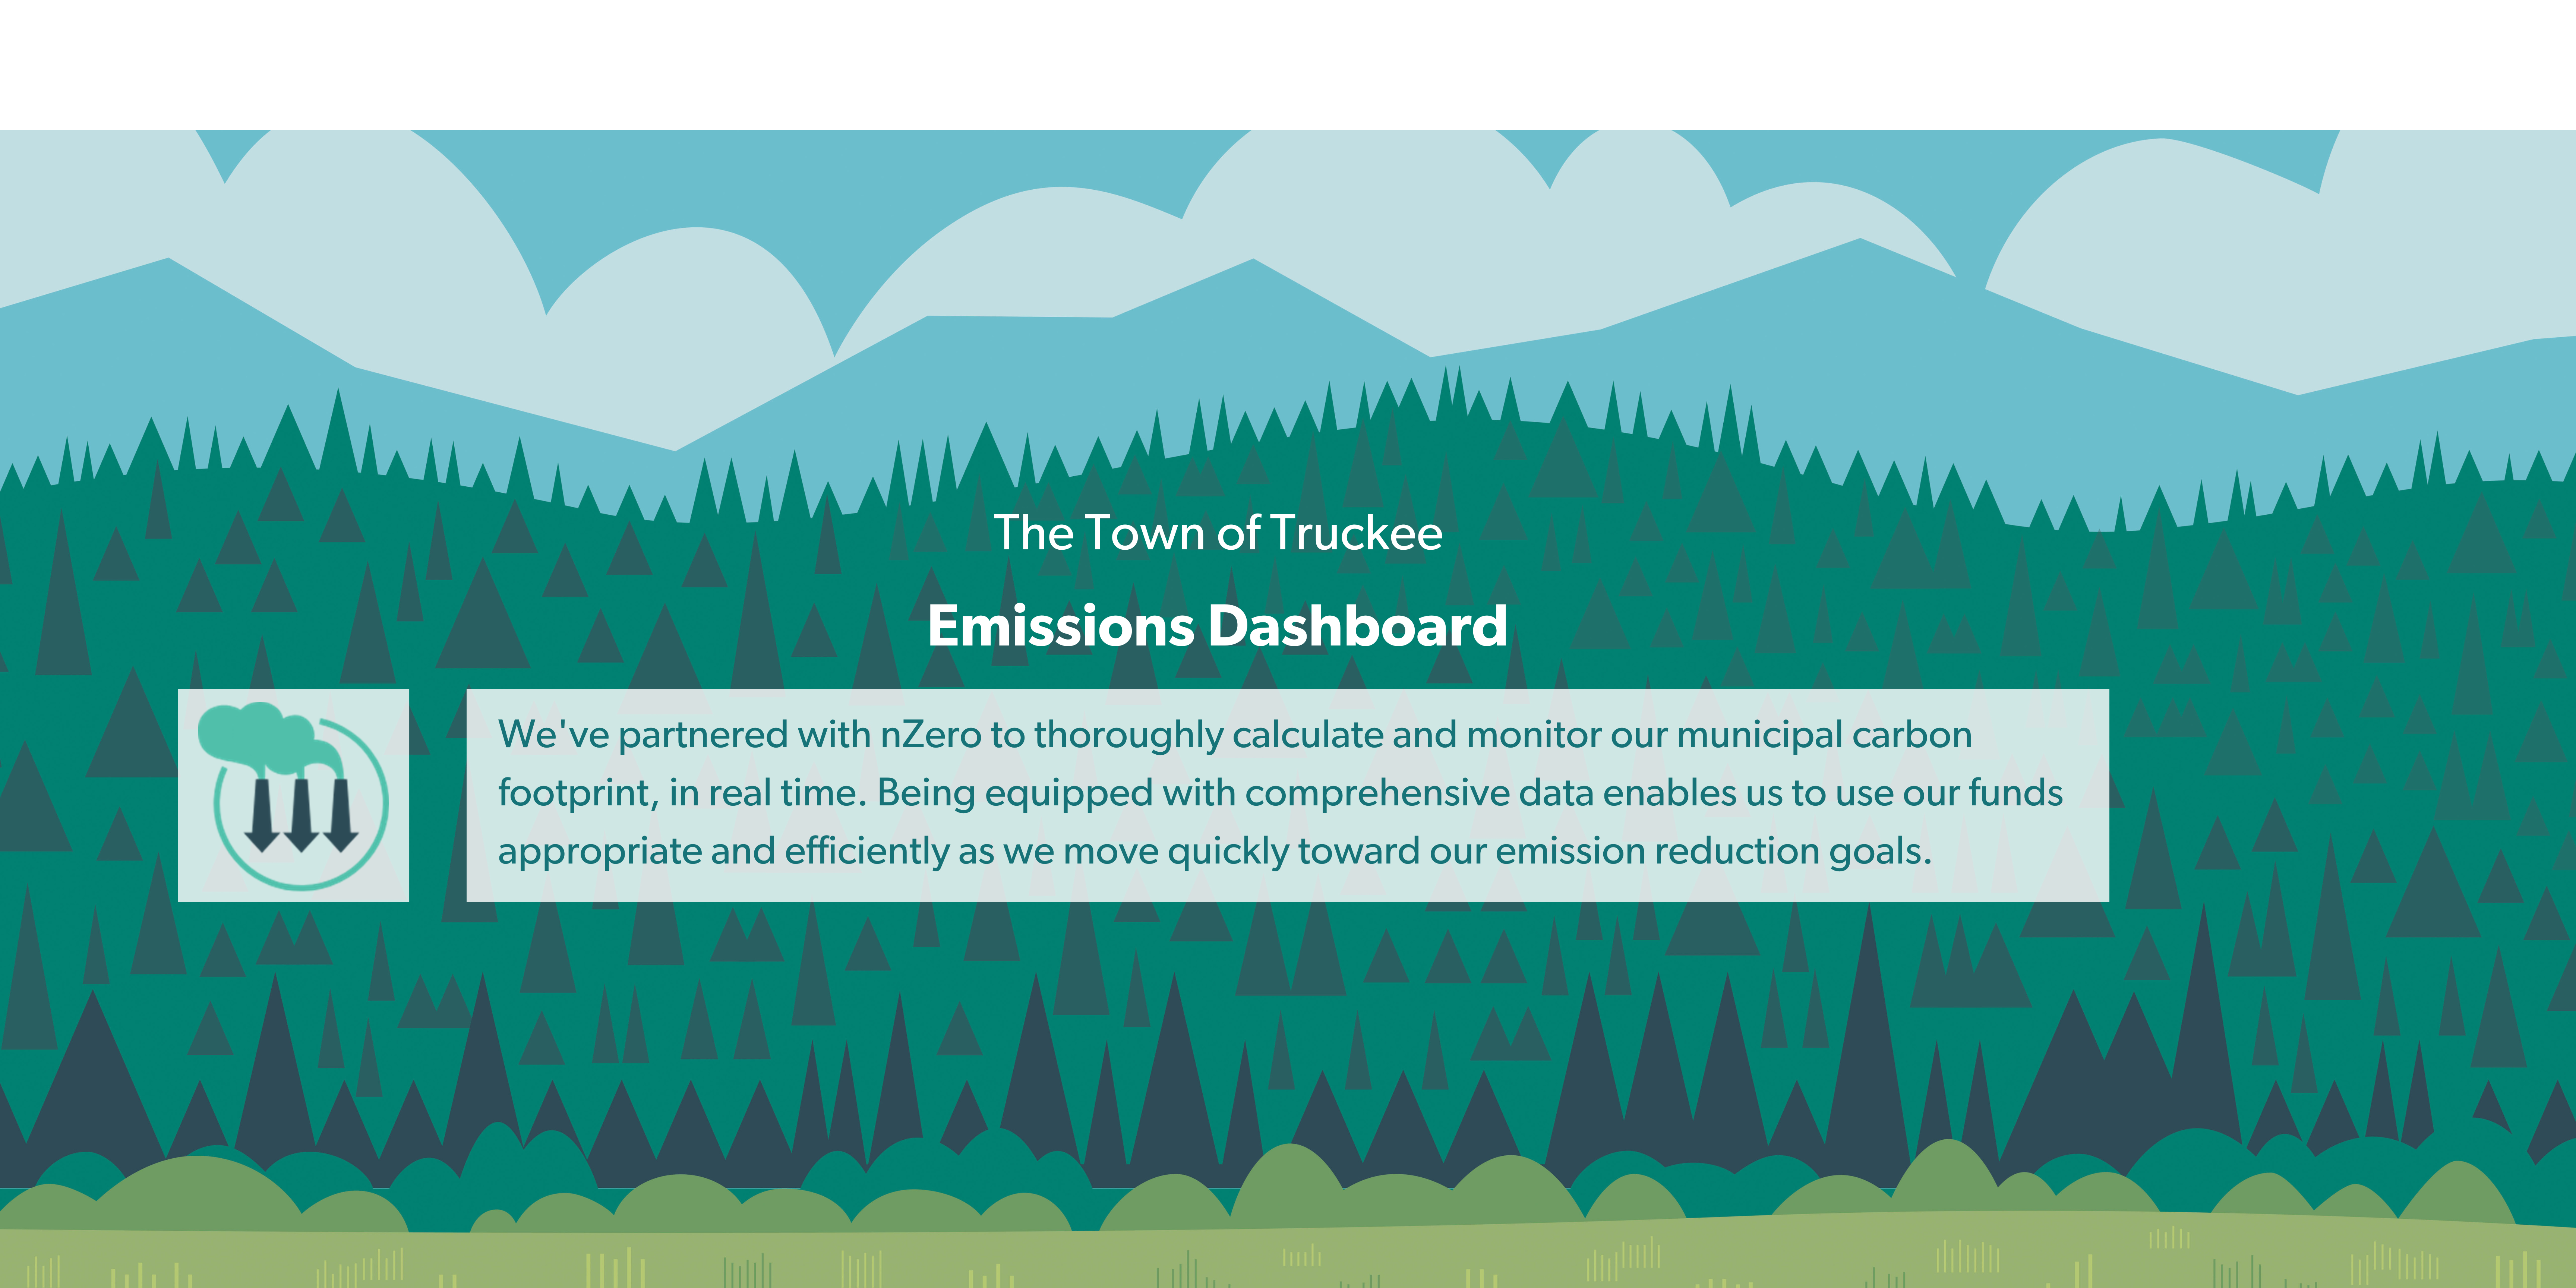 https://www.keeptruckeegreen.org/wp-content/uploads/2022/10/The-Town-of-Truckee-Emissions-Dashboard-5.png